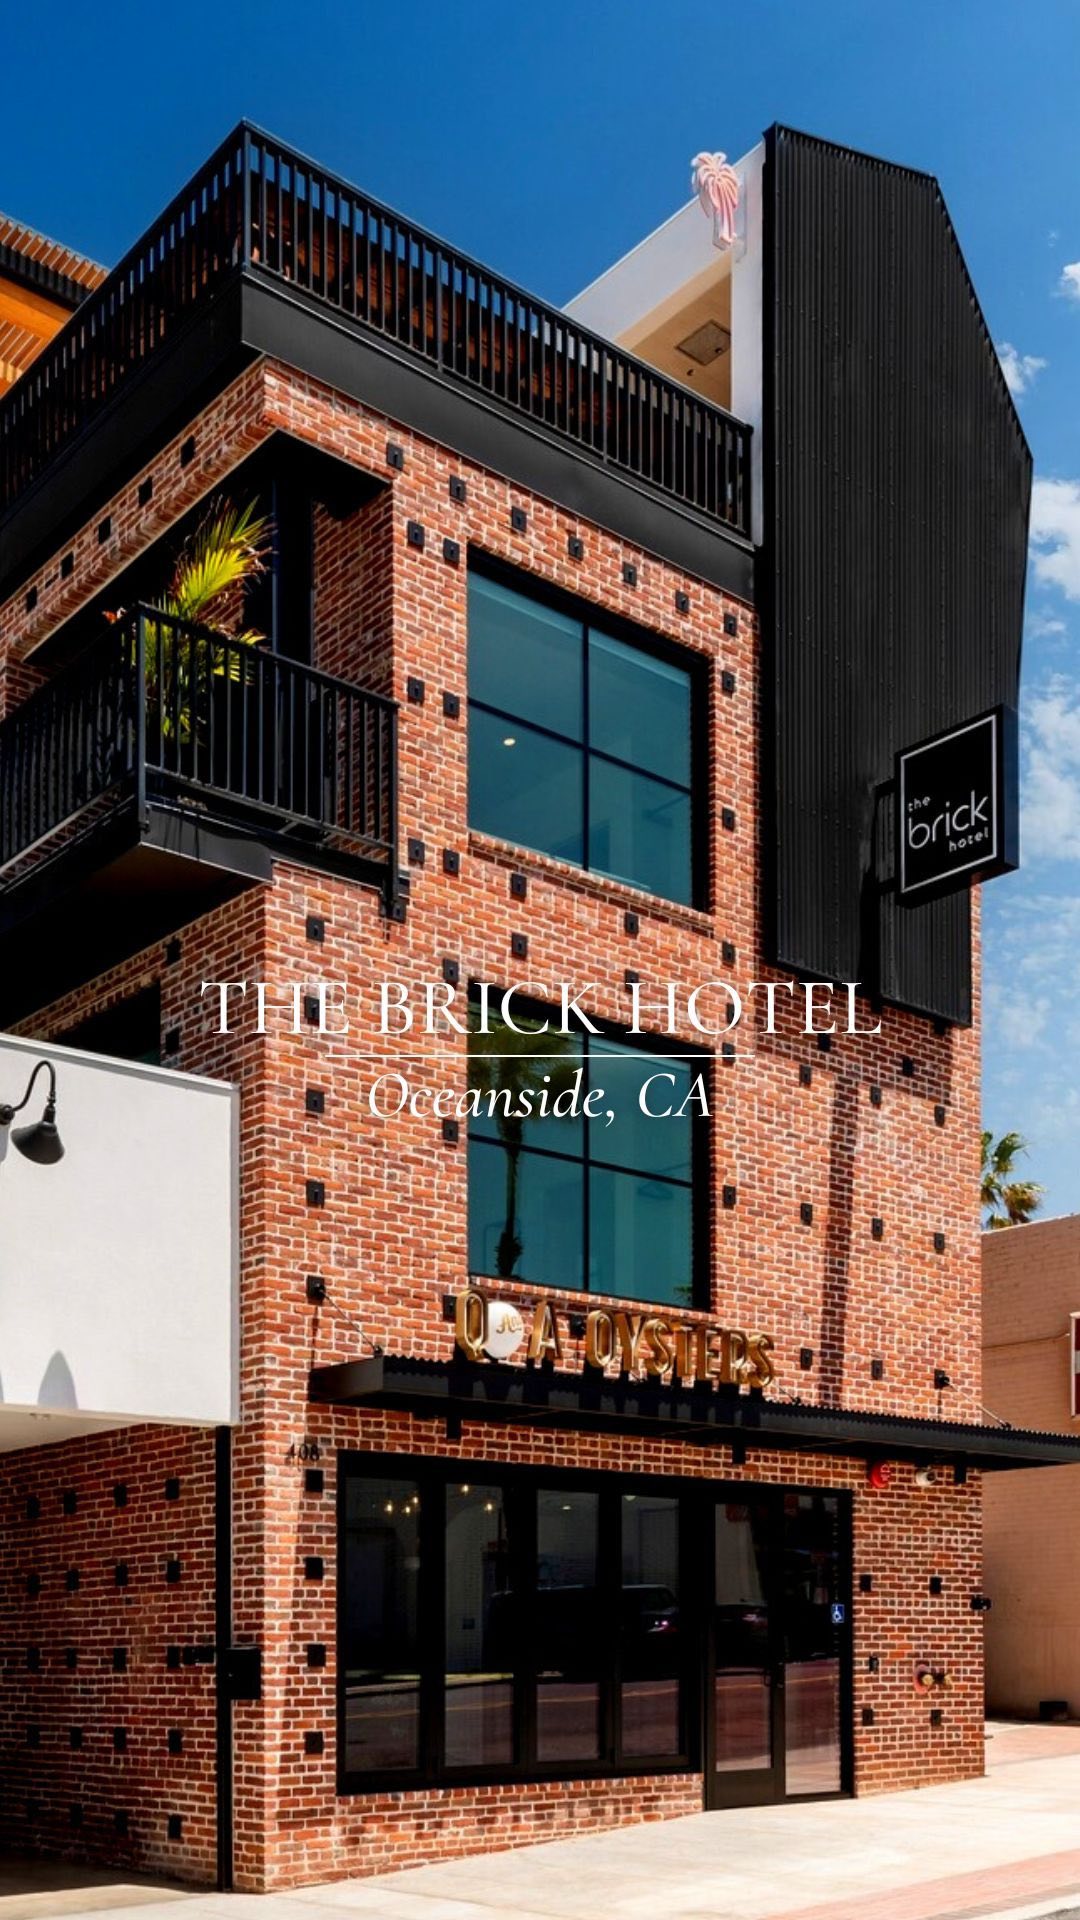 Oceanside is evolving into something more than just a halfway point between San Diego and Los Angeles; it’s booming into a destination of its own. The recently opened @thebrickhotel reflects this transformation, paying homage to the area’s rich heritage through its commitment to contemporary comfort while maintaining Oceanside’s one-of-a-kind character. 

Enjoy charming accommodations with in-room self-checkin and digital concierge. Head upstairs to enjoy sunset views and cocktails at @cococabanaoside, then make your way to the first floor for oysters and southern hospitality at @shuckwitus.